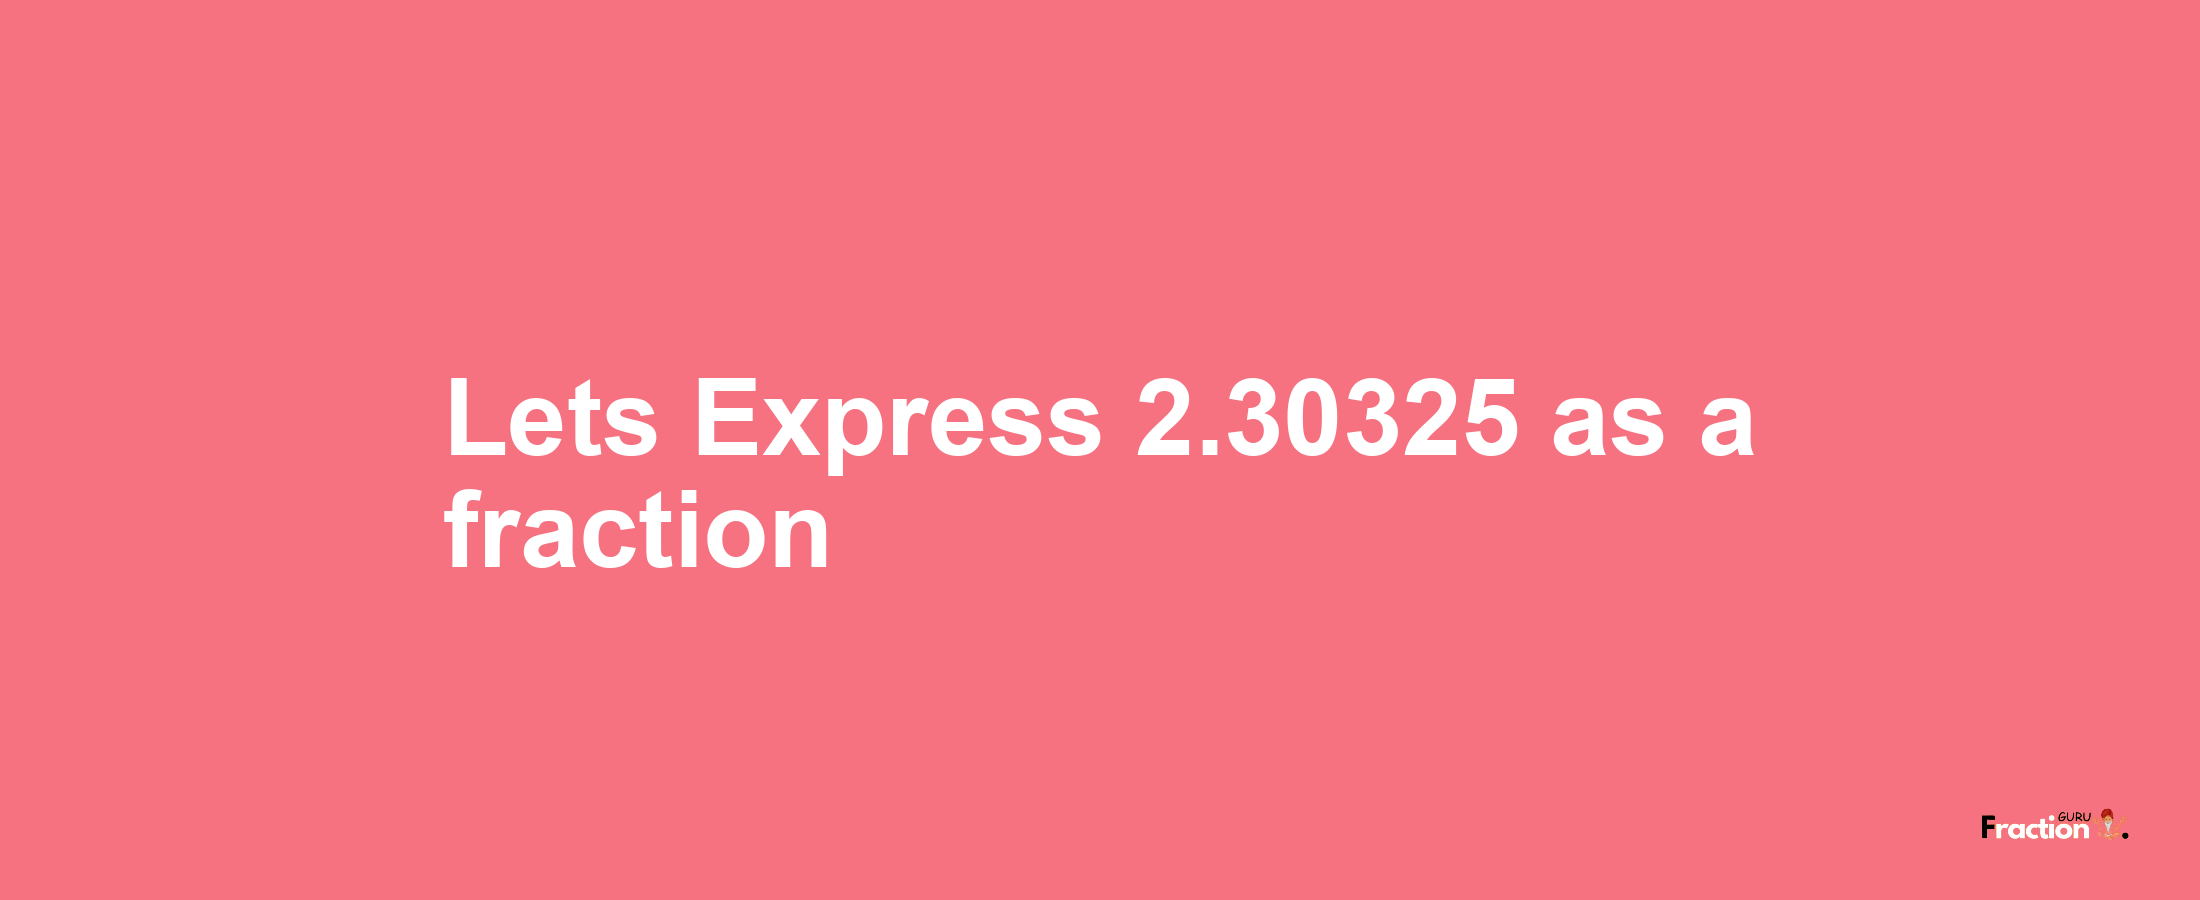 Lets Express 2.30325 as afraction